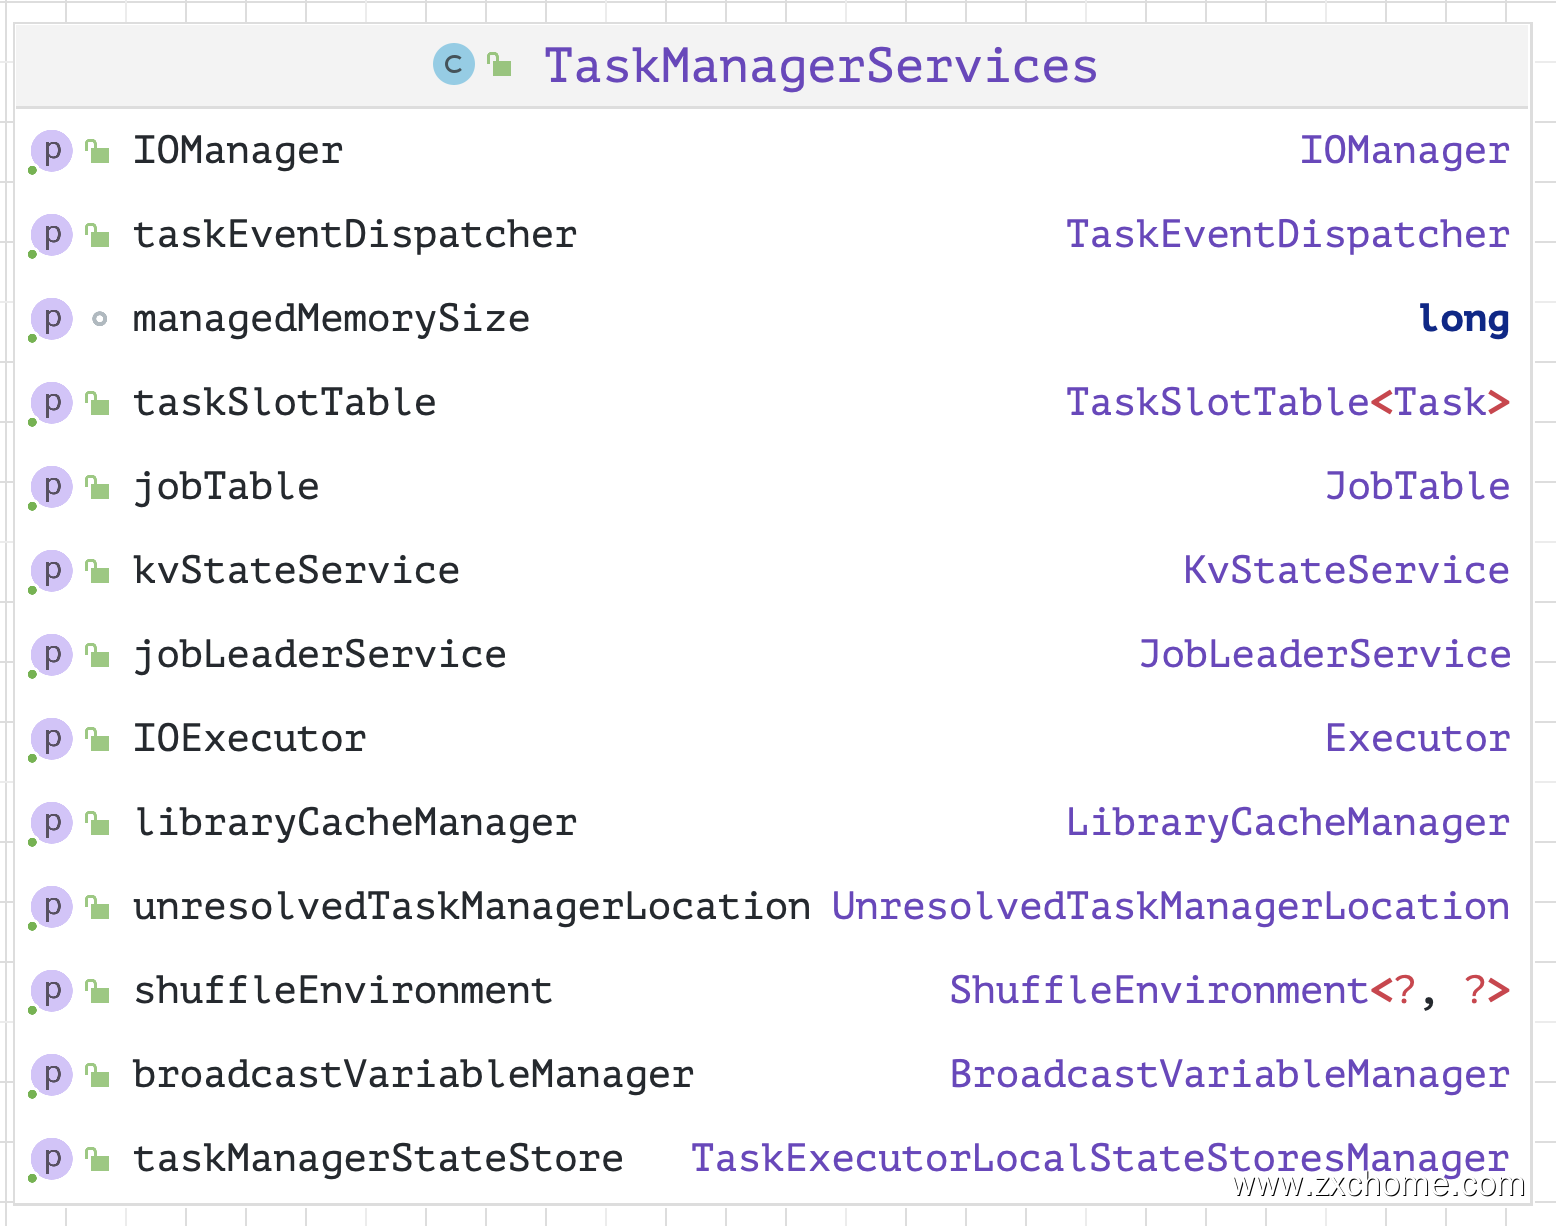 TaskManagerServices